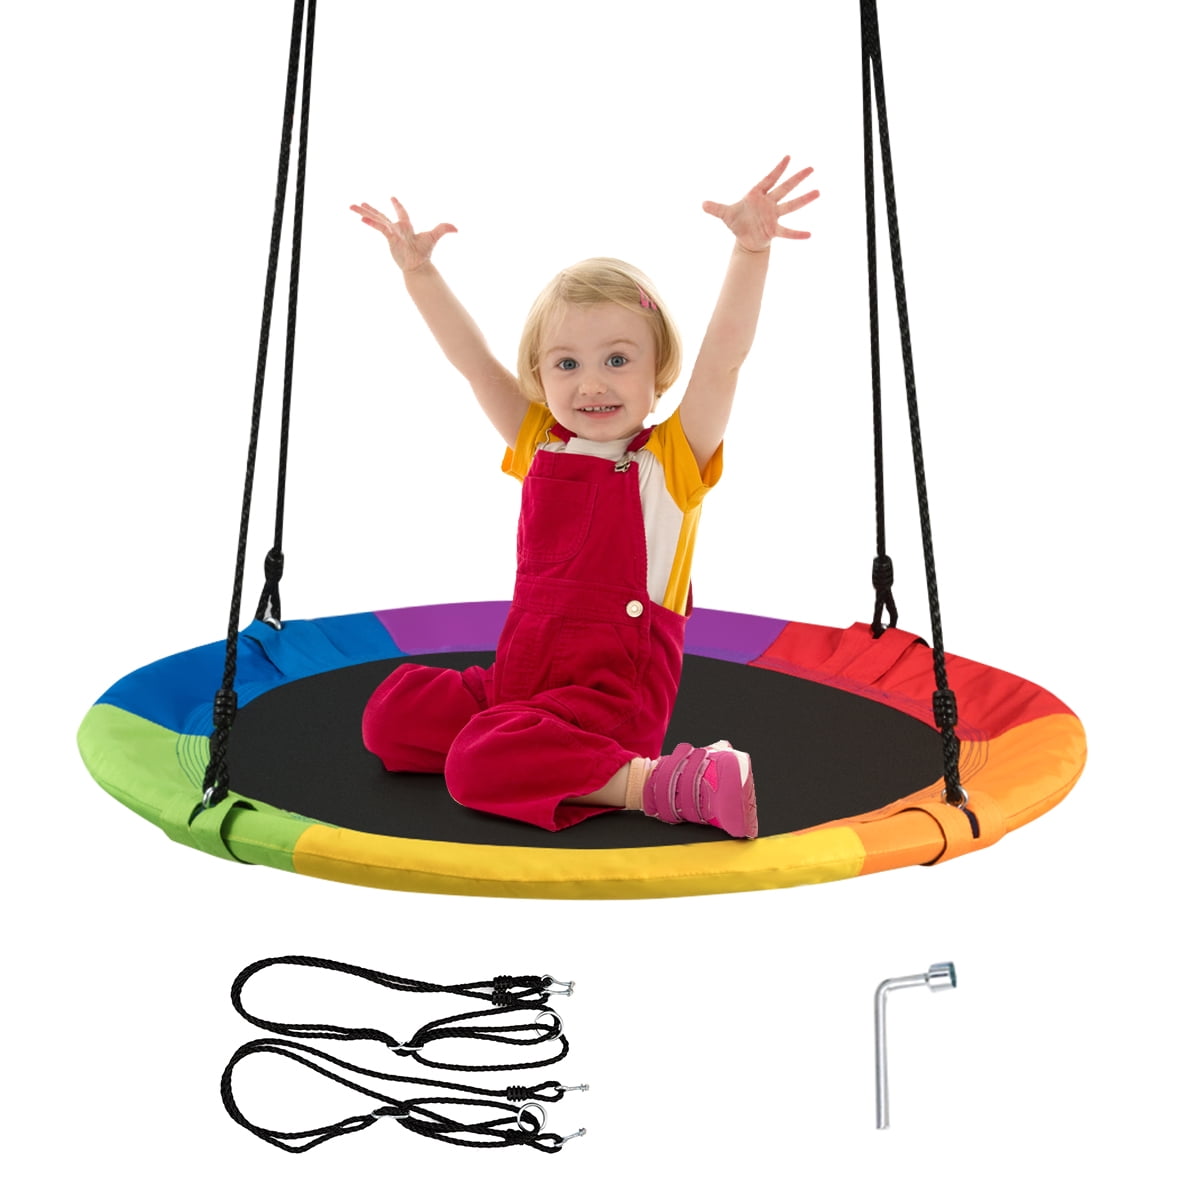 150kg Weight Capacity Adjustable Hanging Ropes Hanging Swing Nest Giant 40 Inch Flying Saucer Tree Swing for Indoor/Outdoor Use Ready to Hang and Enjoy as a Family 